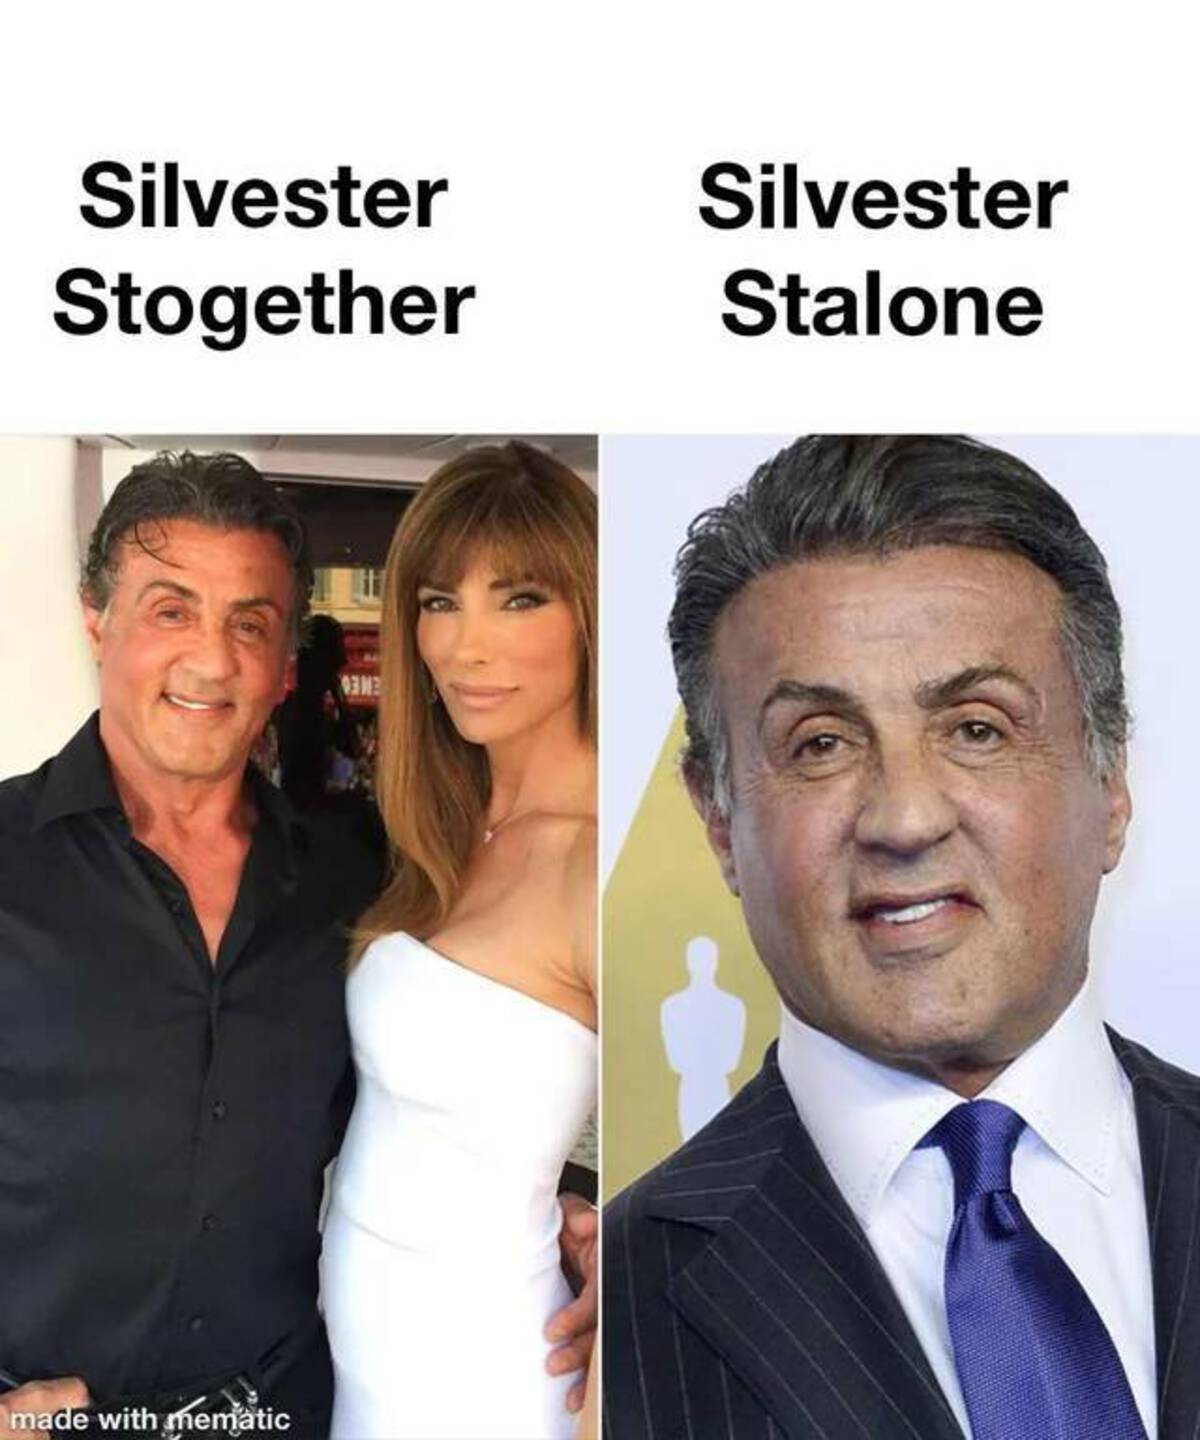 sylvester stallone - Silvester Stogether made with mematic One Silvester Stalone